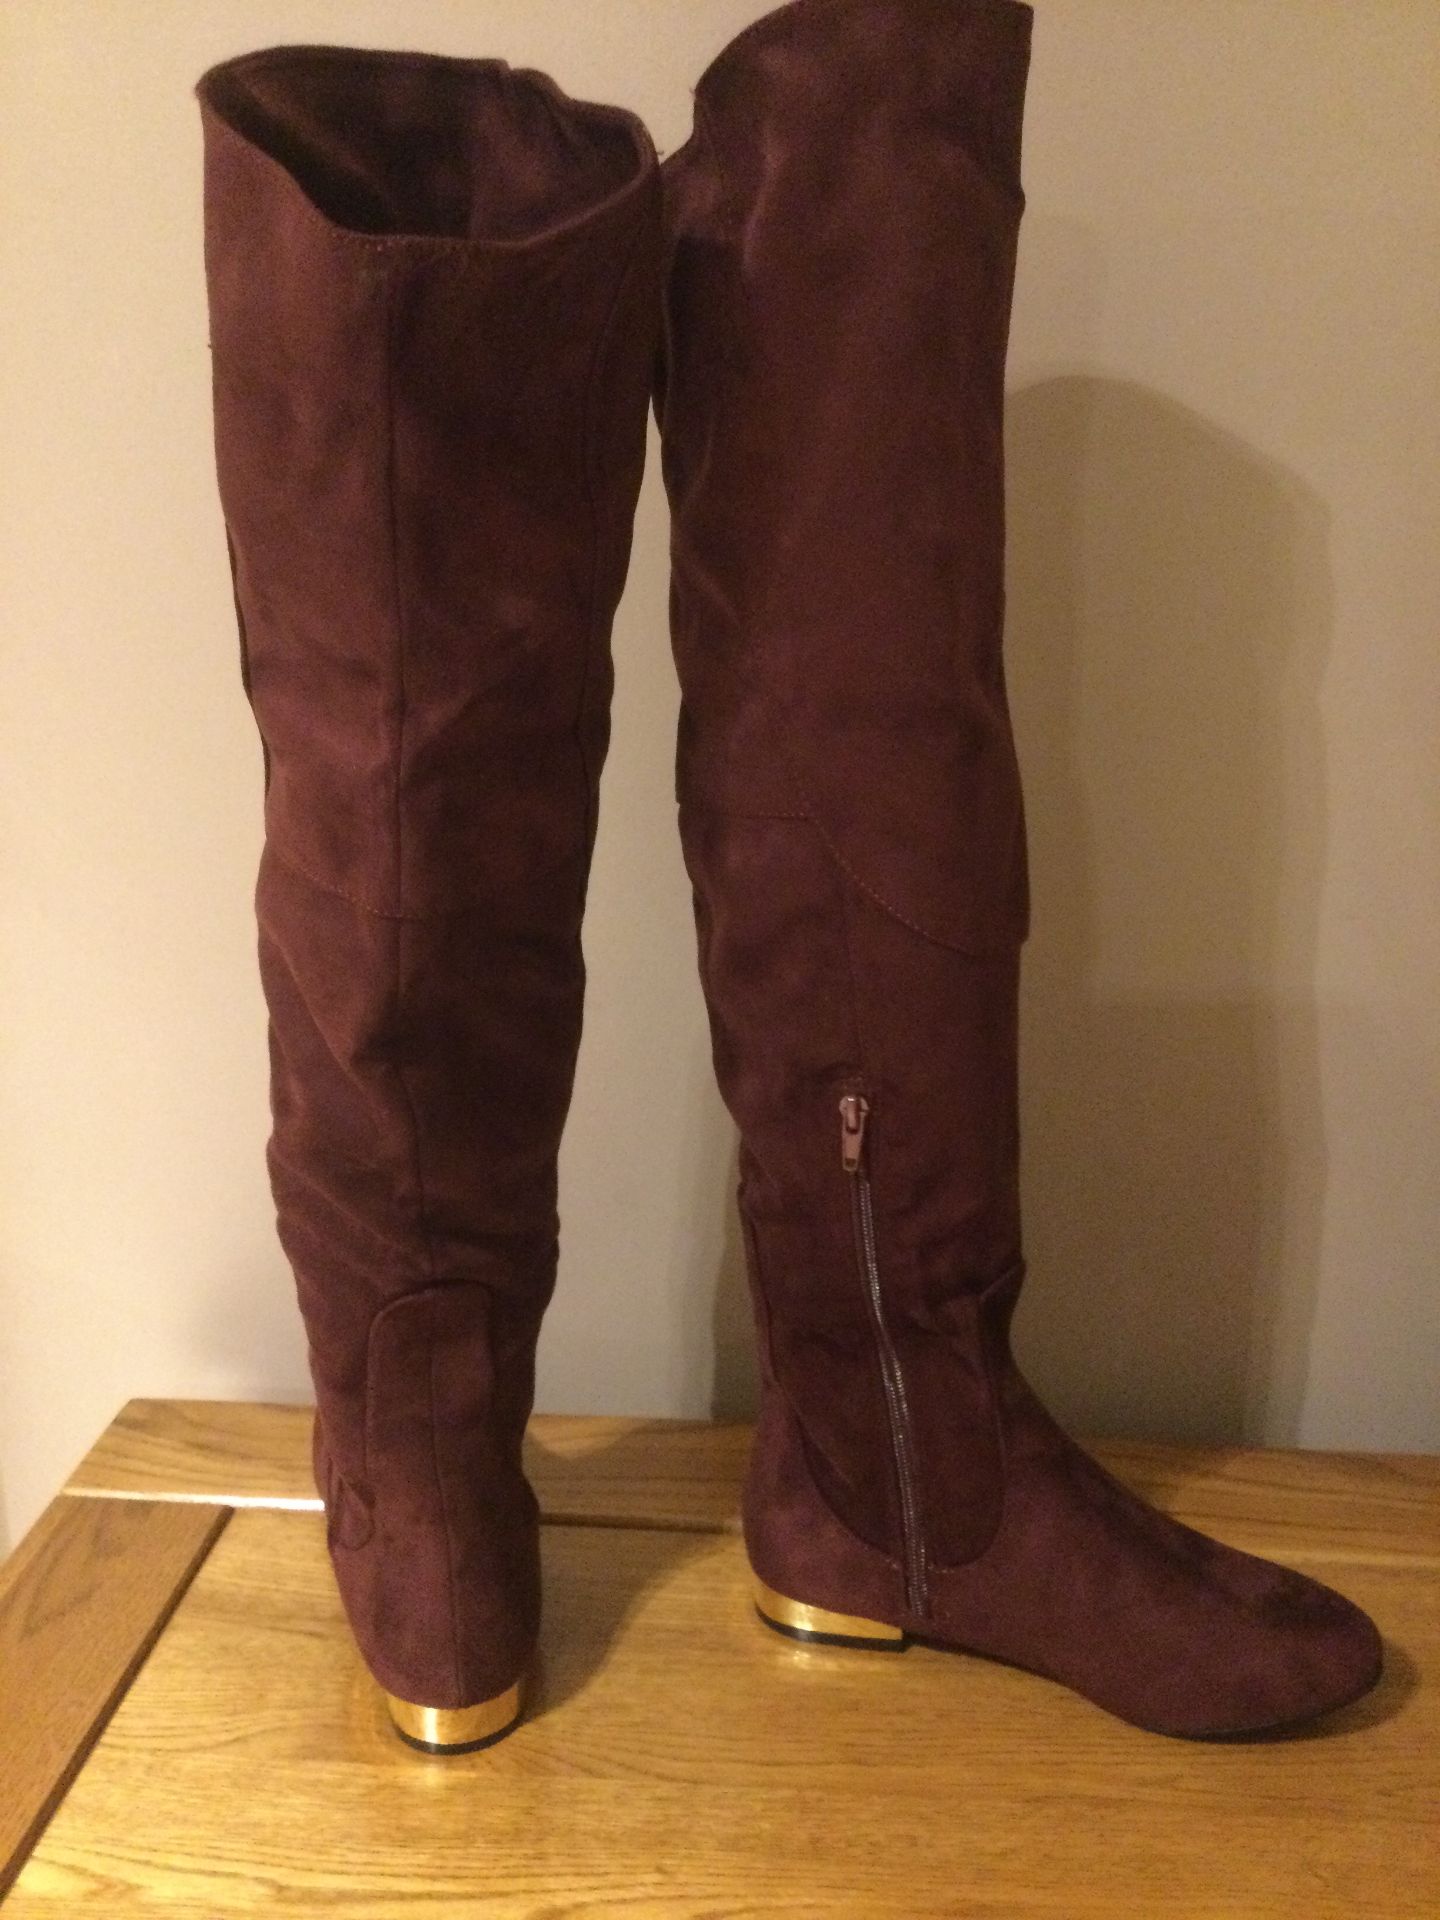 Dolcis “Katie” Long Boots, Low Block Heel, Size 4, Burgundy- New RRP £55.00 - Image 2 of 7